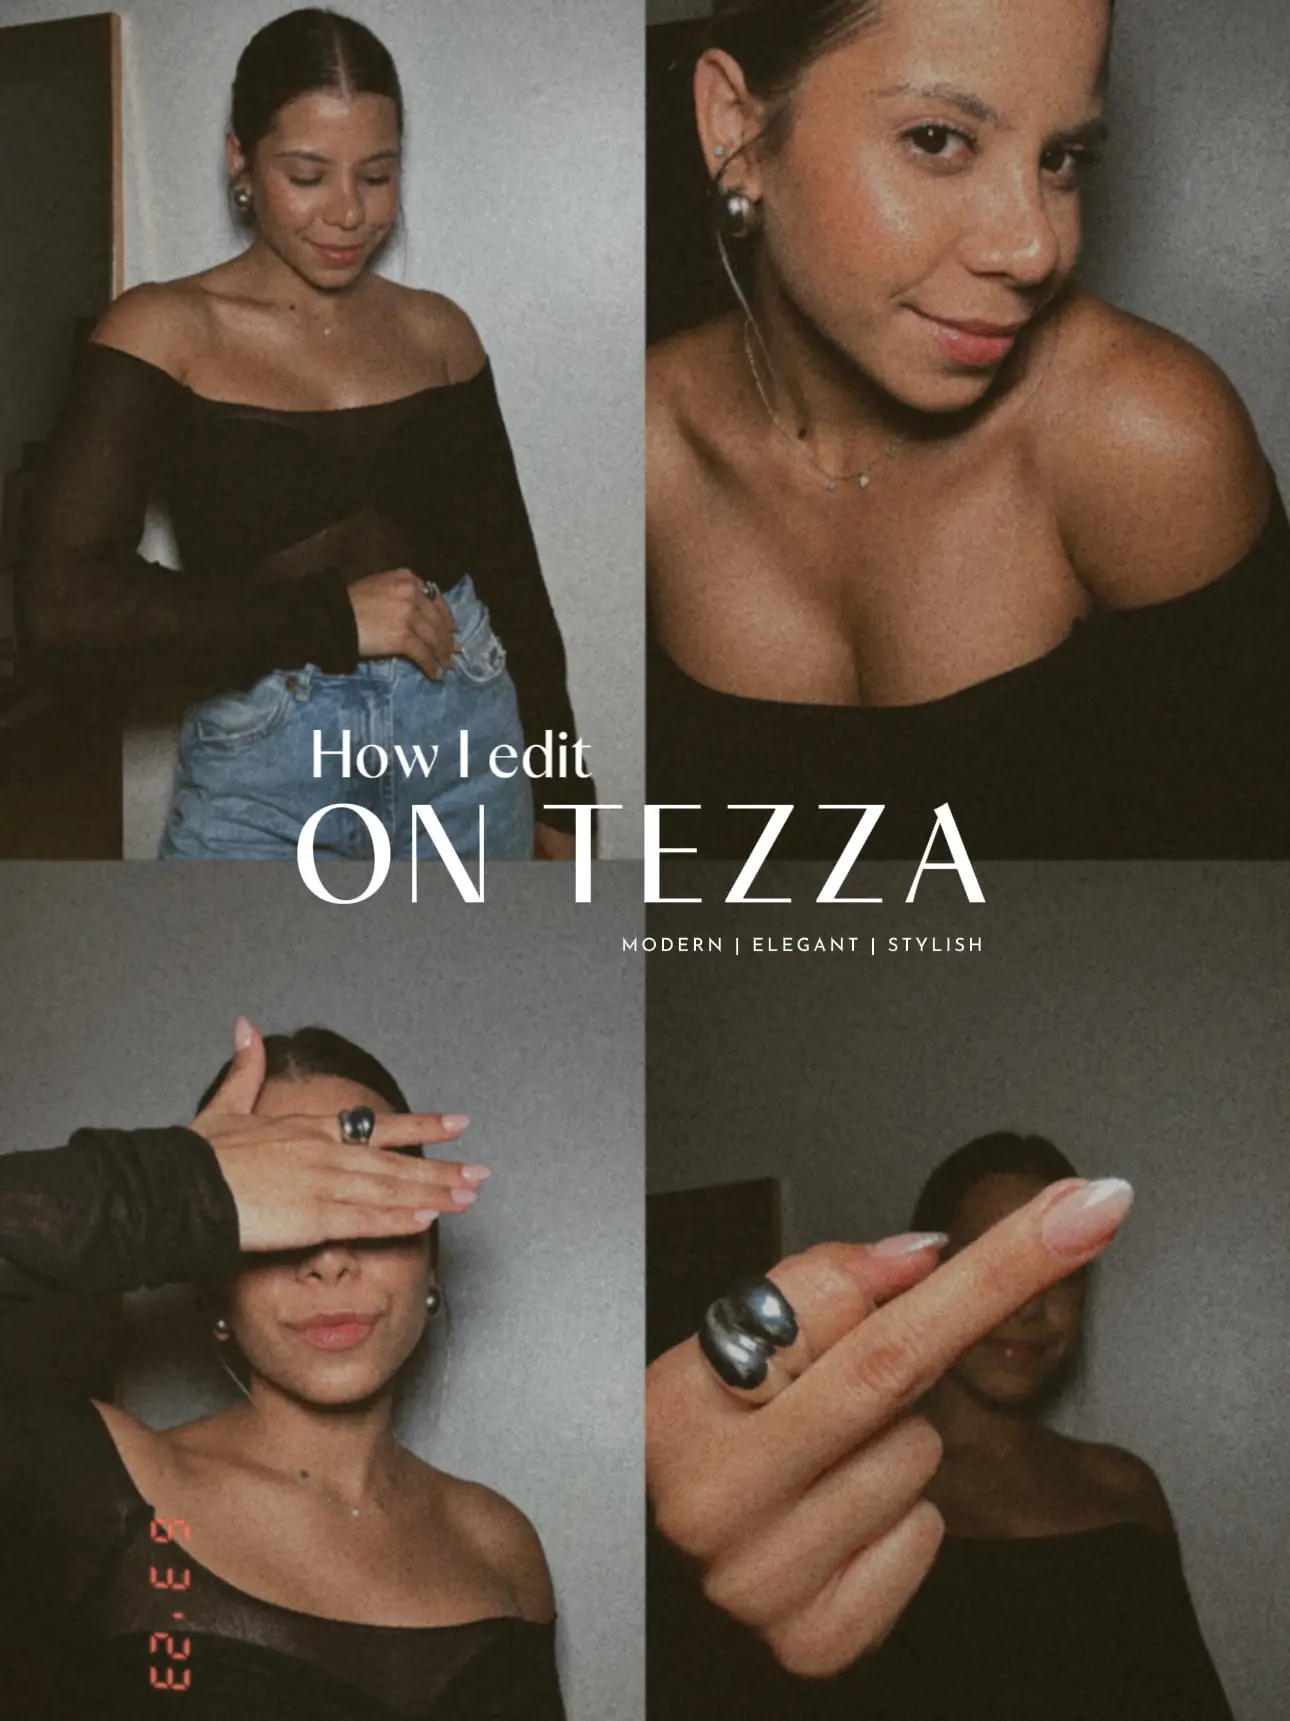 How I edit my photos on the Tezza app 's images